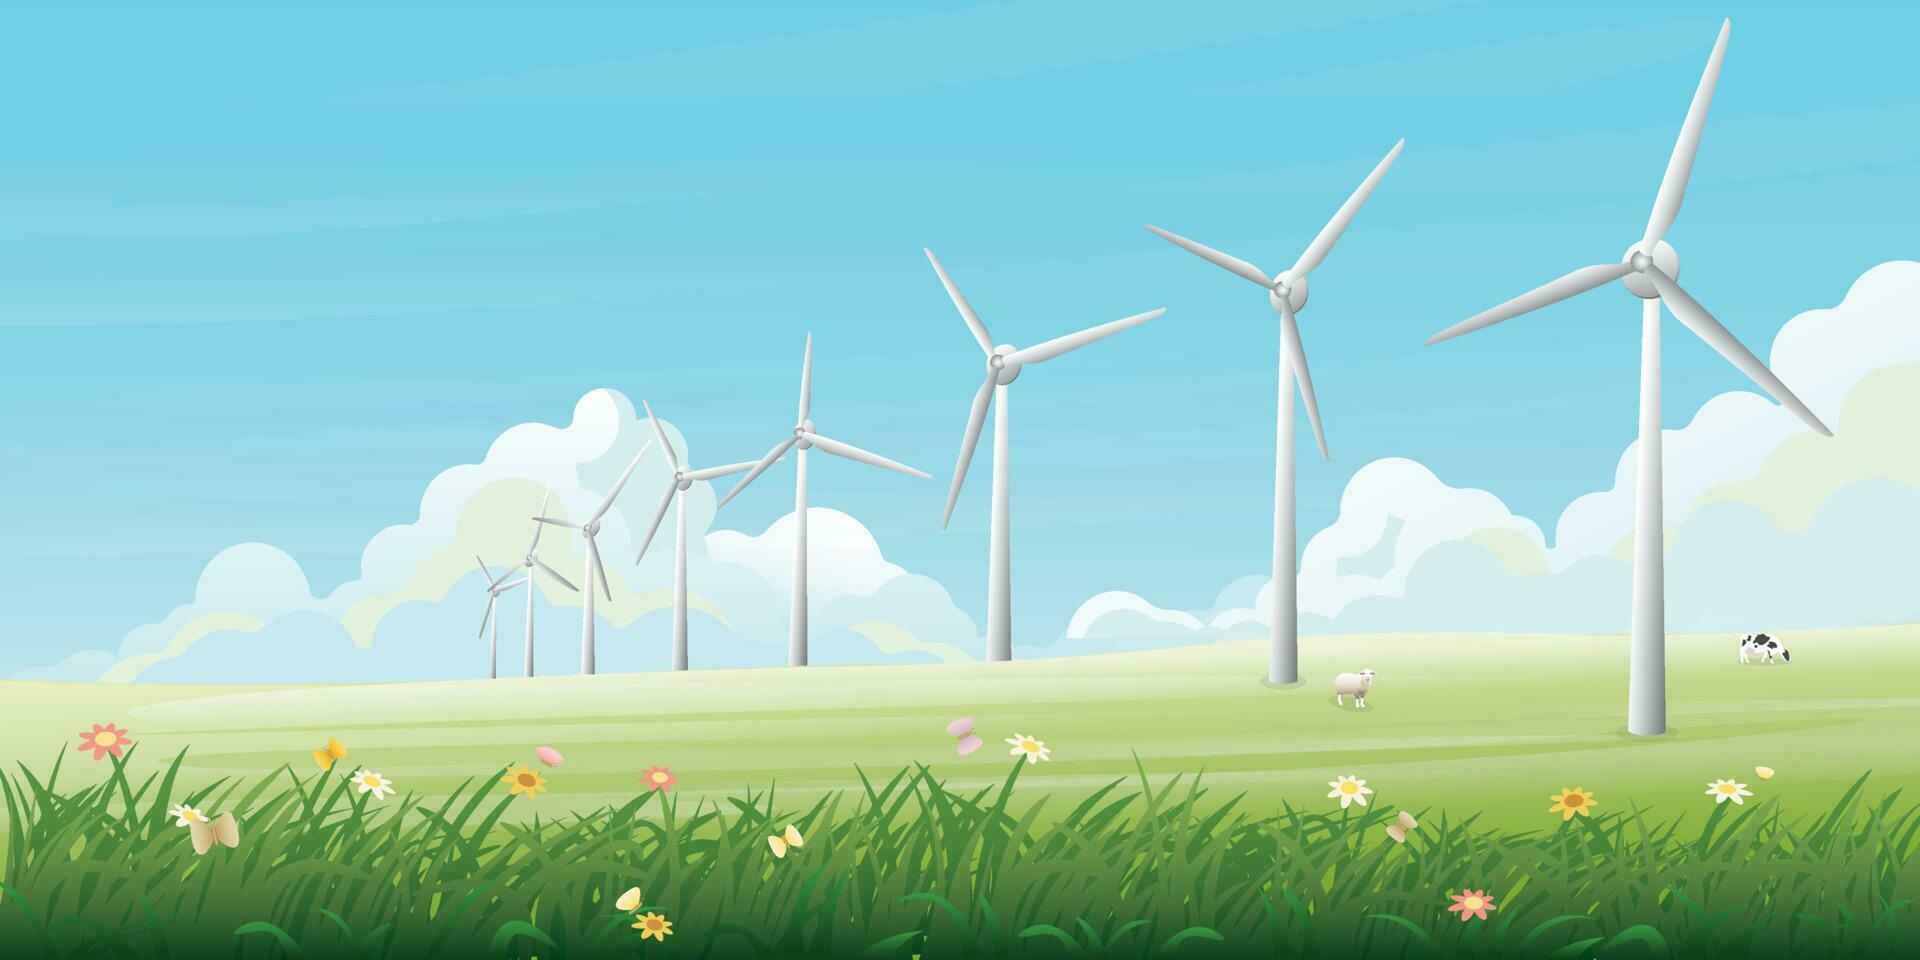 Countryside fields landscape with wind turbines and blue sky background flat design vector illustration. Sustainable renewable green energy concept.